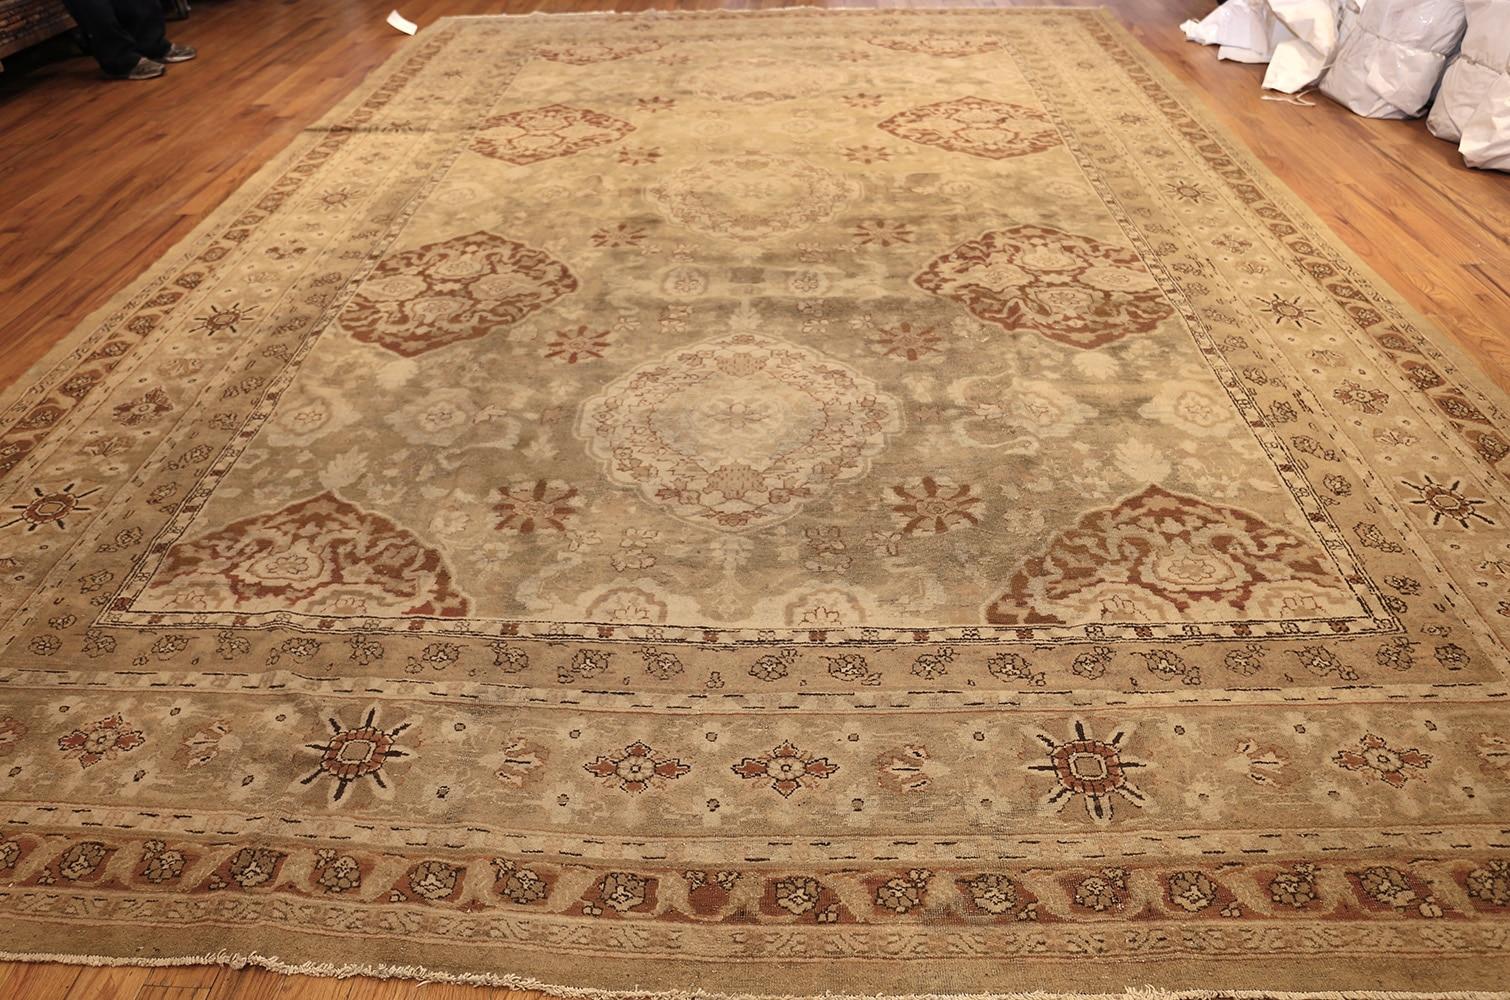 Antique Amritsar rug, origin India, circa 1900. Size: 11 ft 2 in x 16 ft 7 in (3.4 m x 5.05 m)

Indian Amritsar rugs are considered to be some of the finest quality in all of the world. They are based on traditional Persian designs that were brought